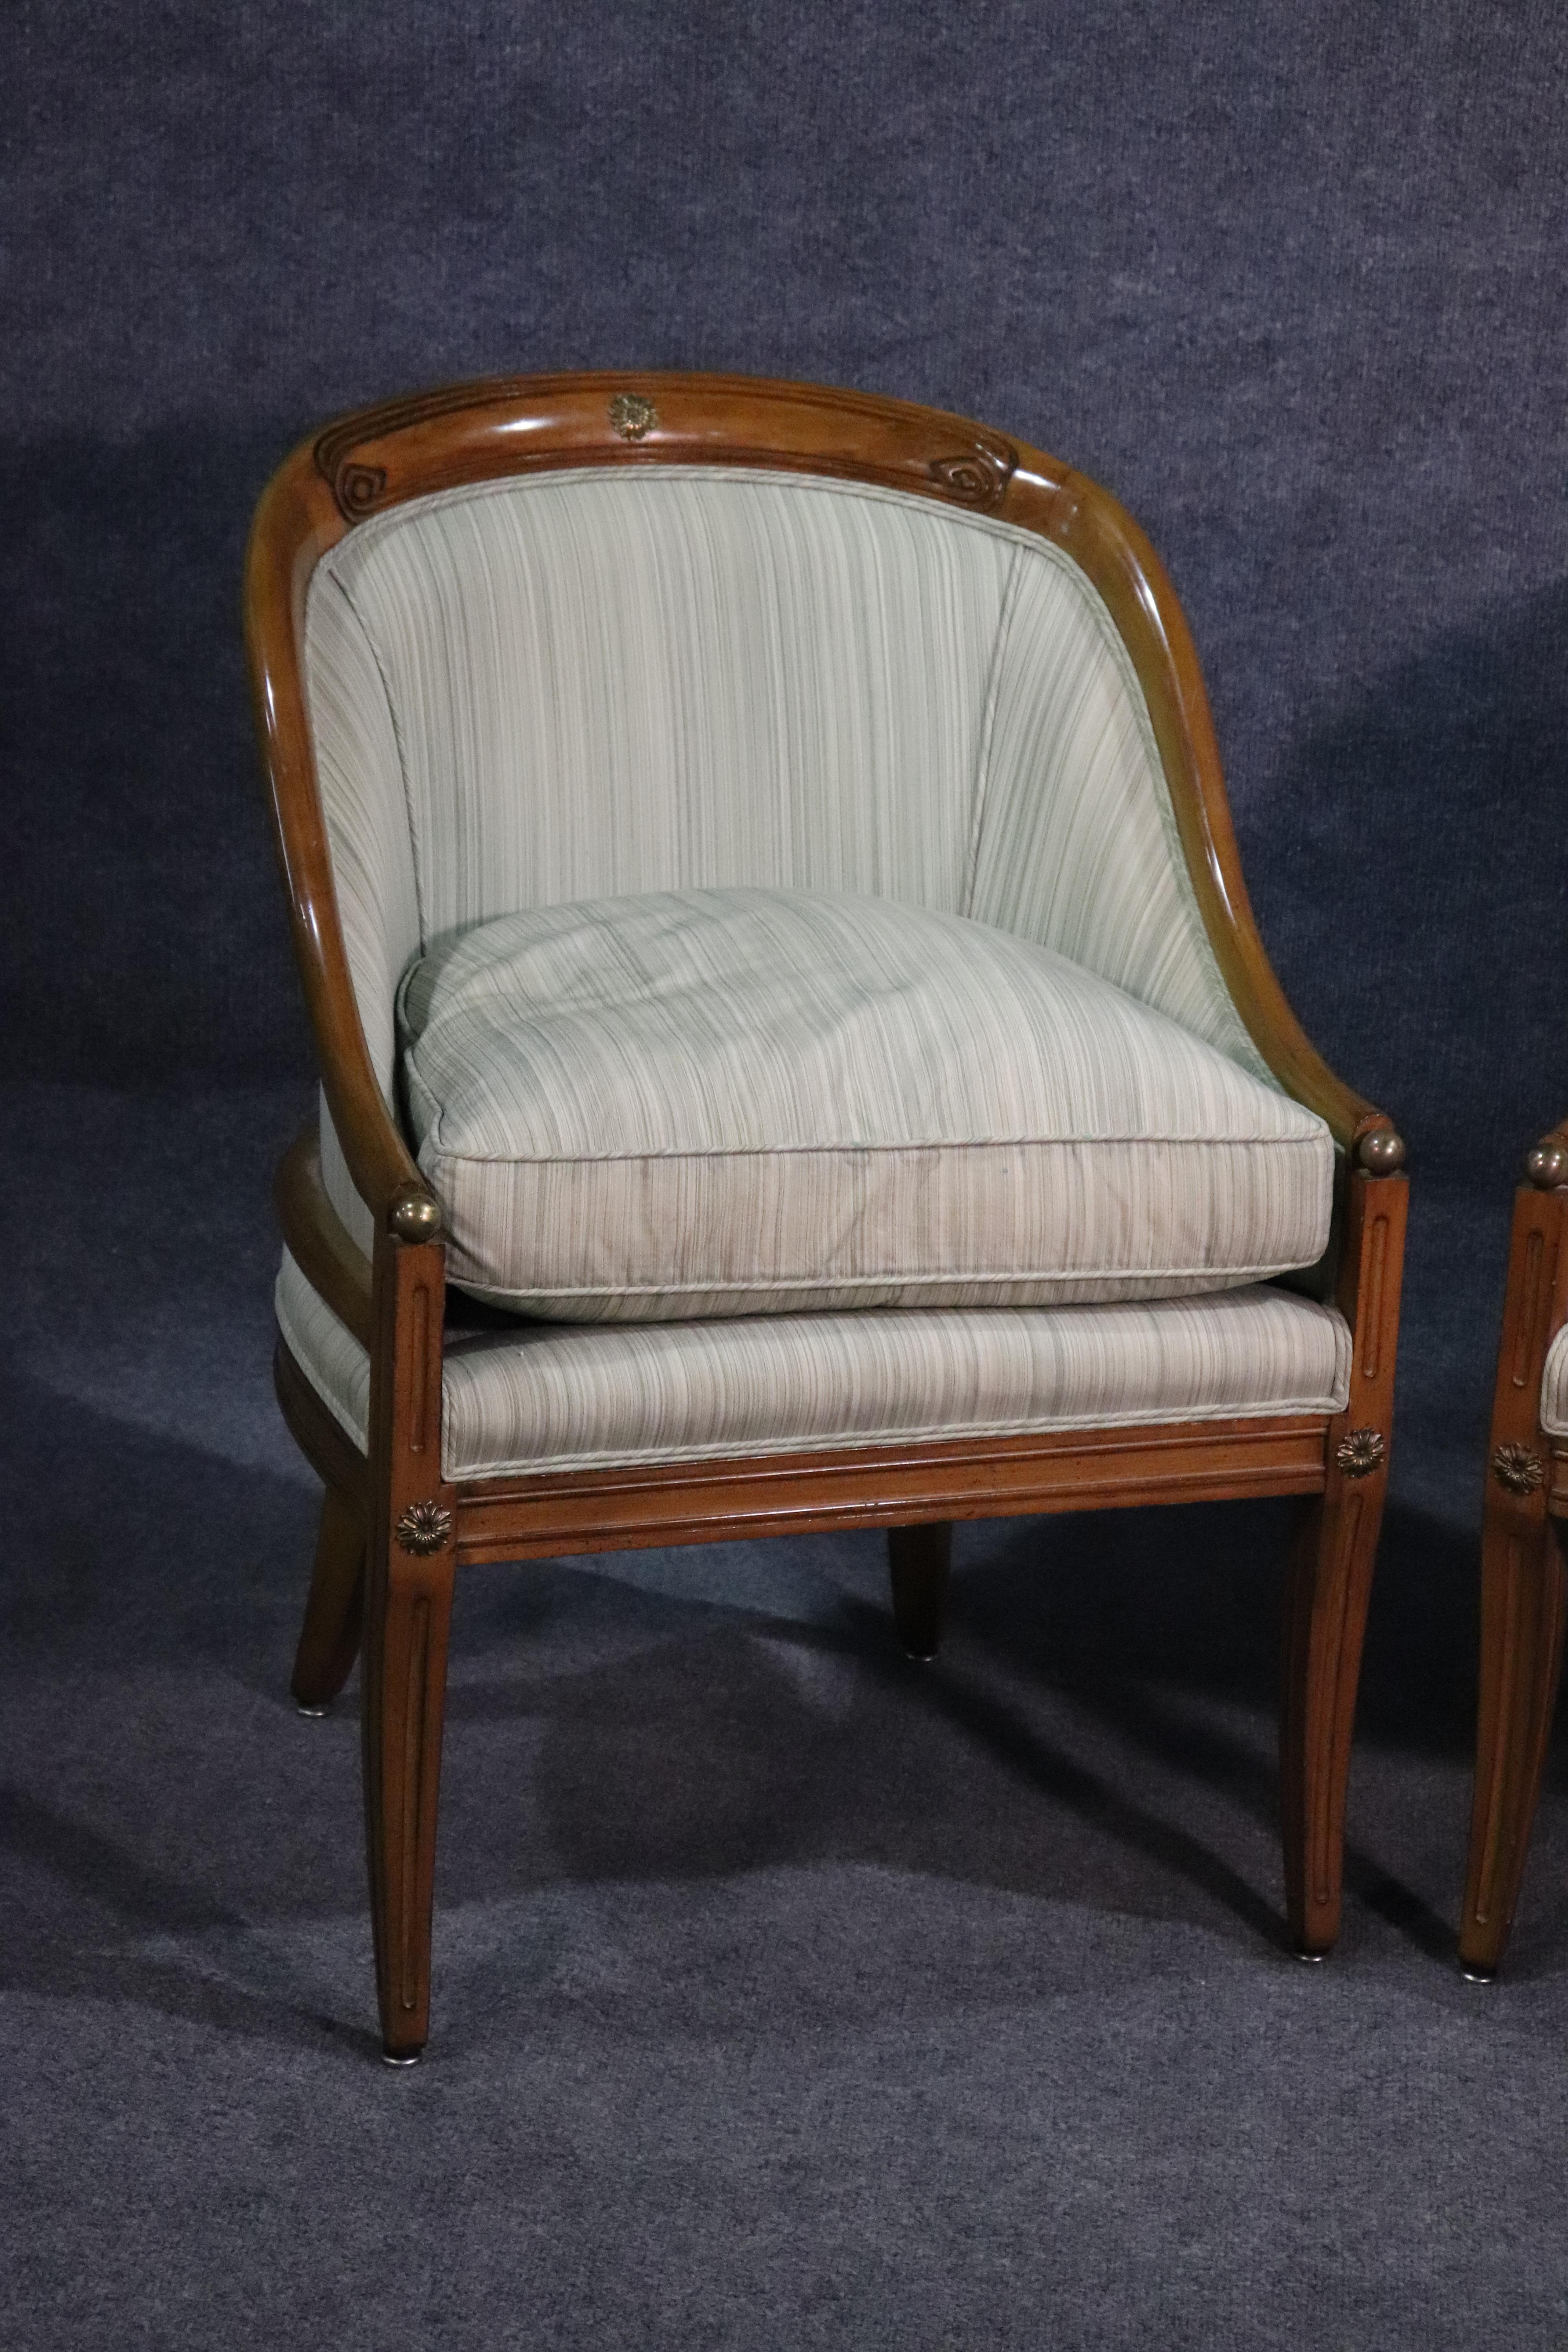 This is a fine pair of French bronze and brass mounted bergère chairs with goose feather filled cushions. They are in good condition with beautifully understated bronze and brass details.
They measure 32 tall x 22.5 wide x 23.5 deep.
The seat